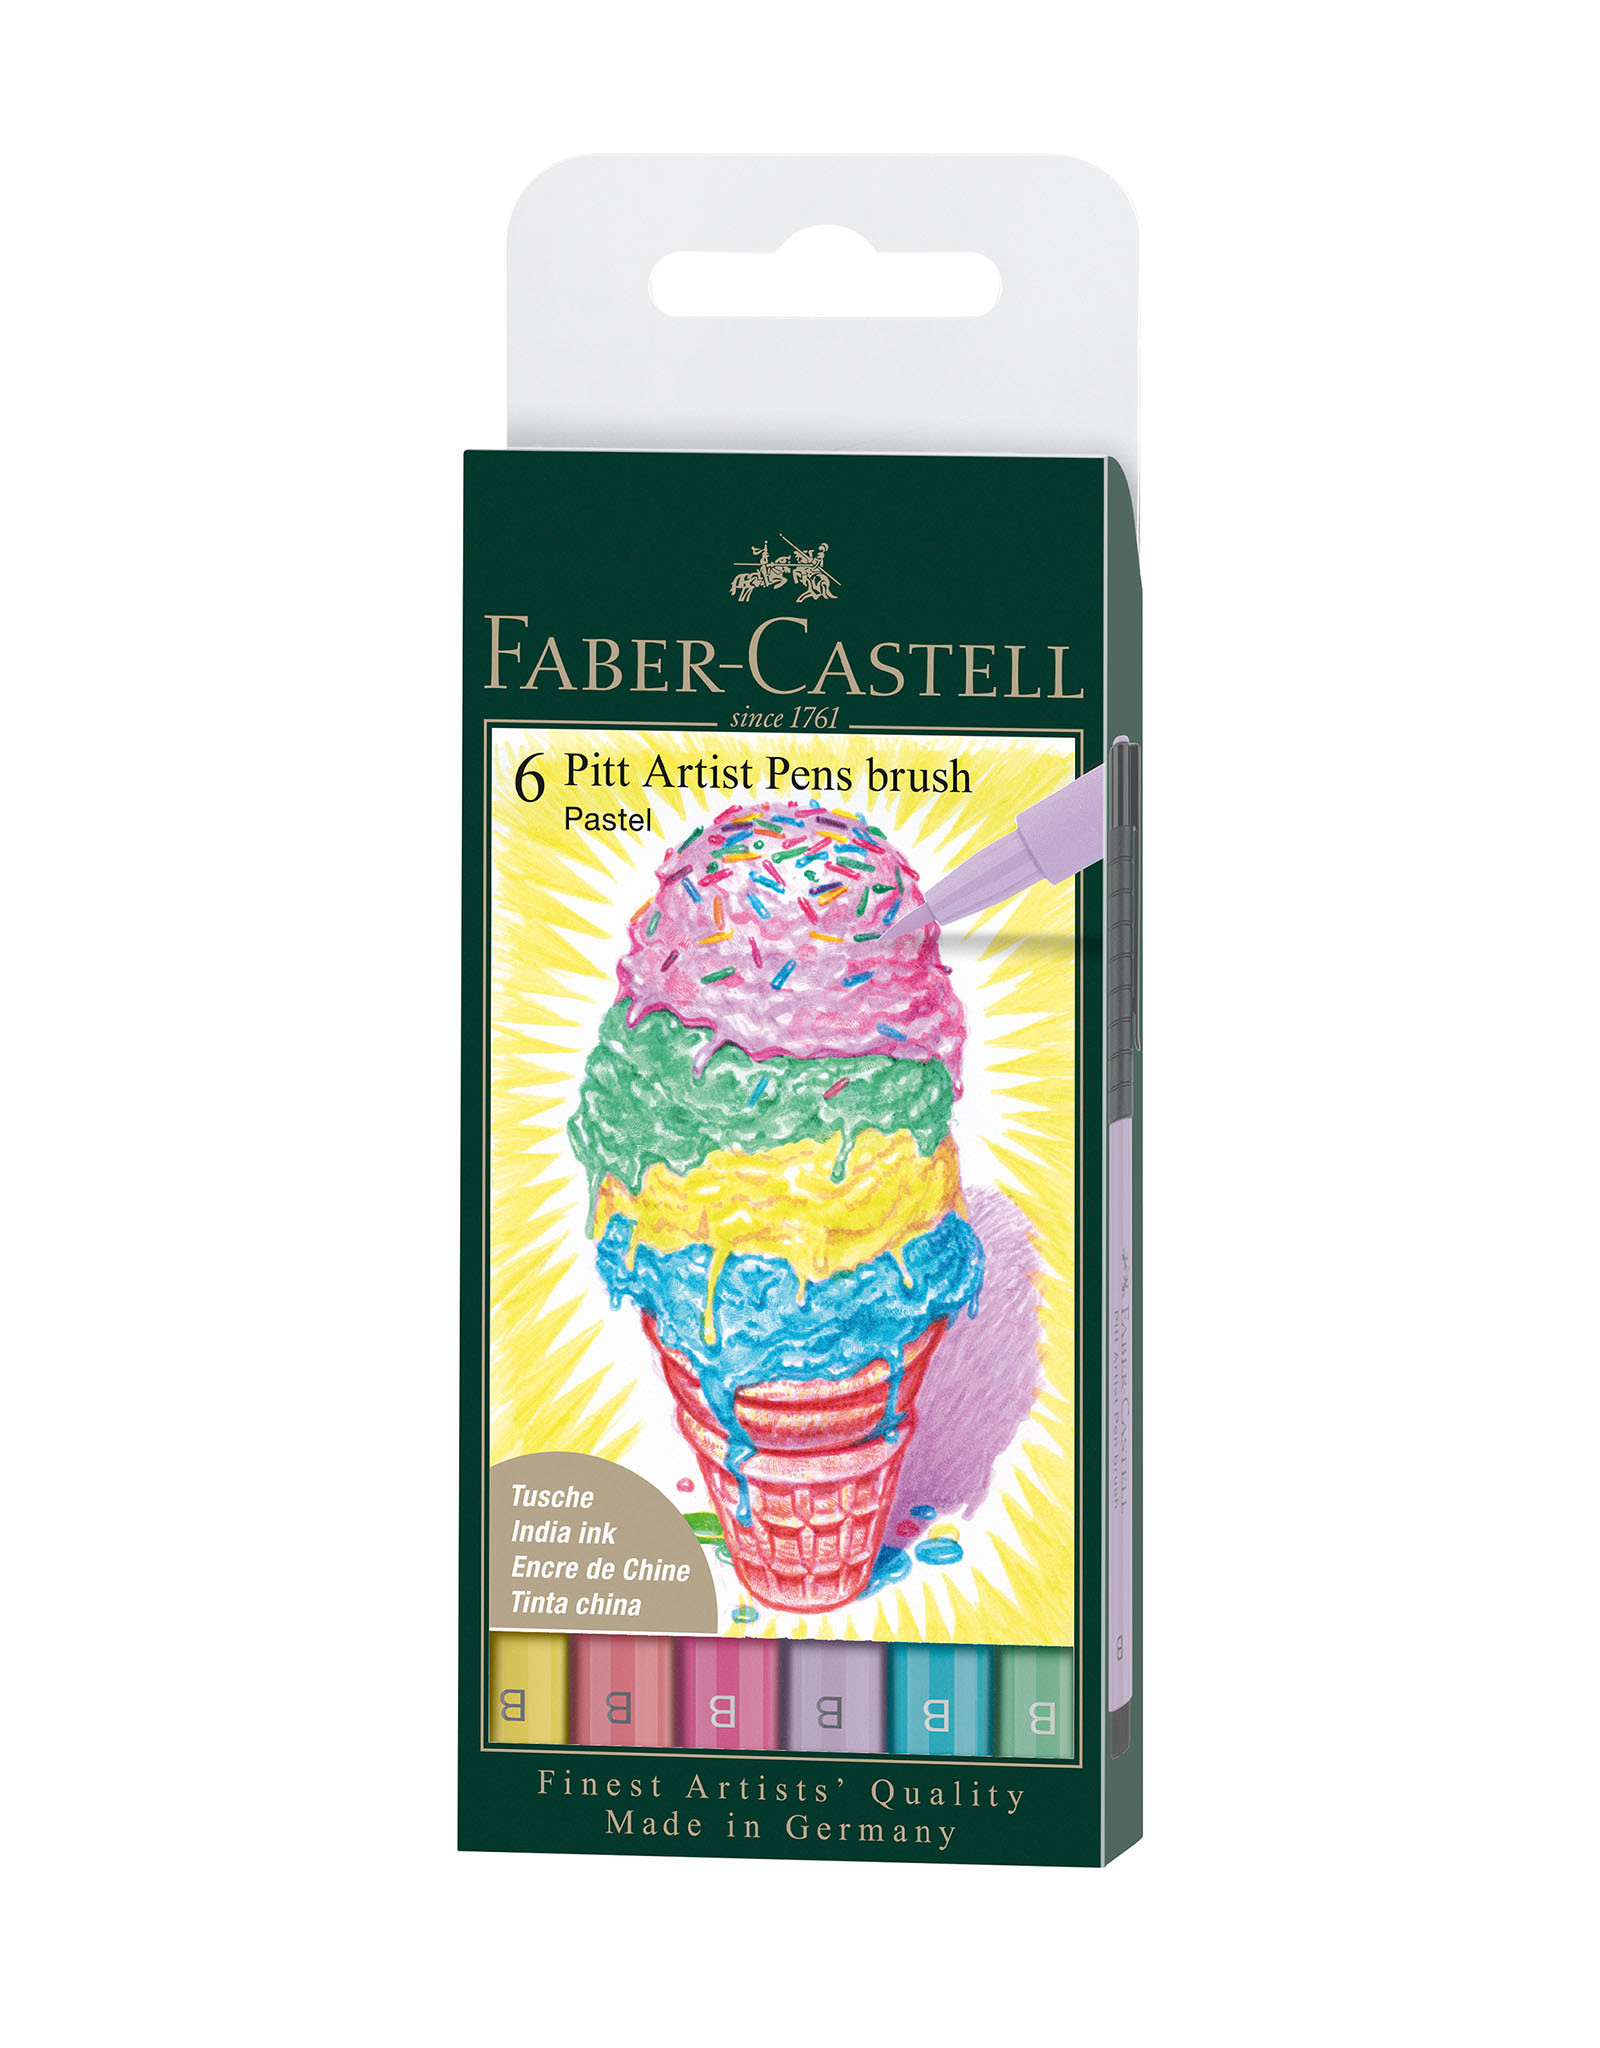 FABER-CASTELL Faber-Castell 6ct Pastel brush pens